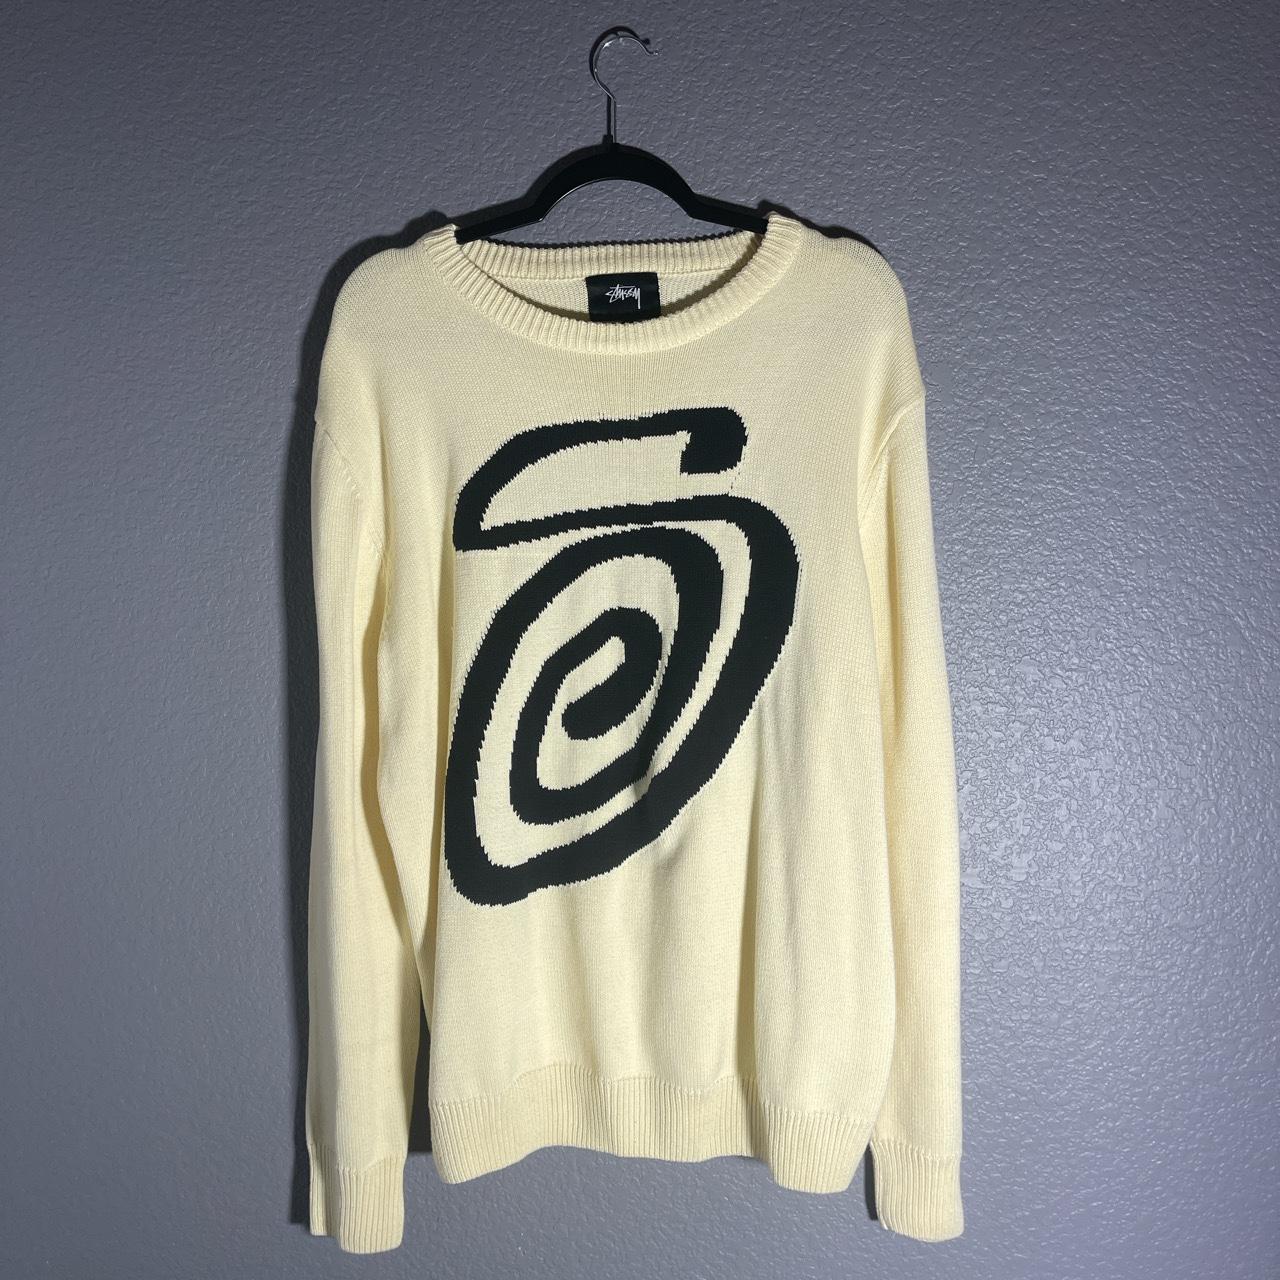 Stussy Curly S Sweater This Stussy sweater is a... - Depop